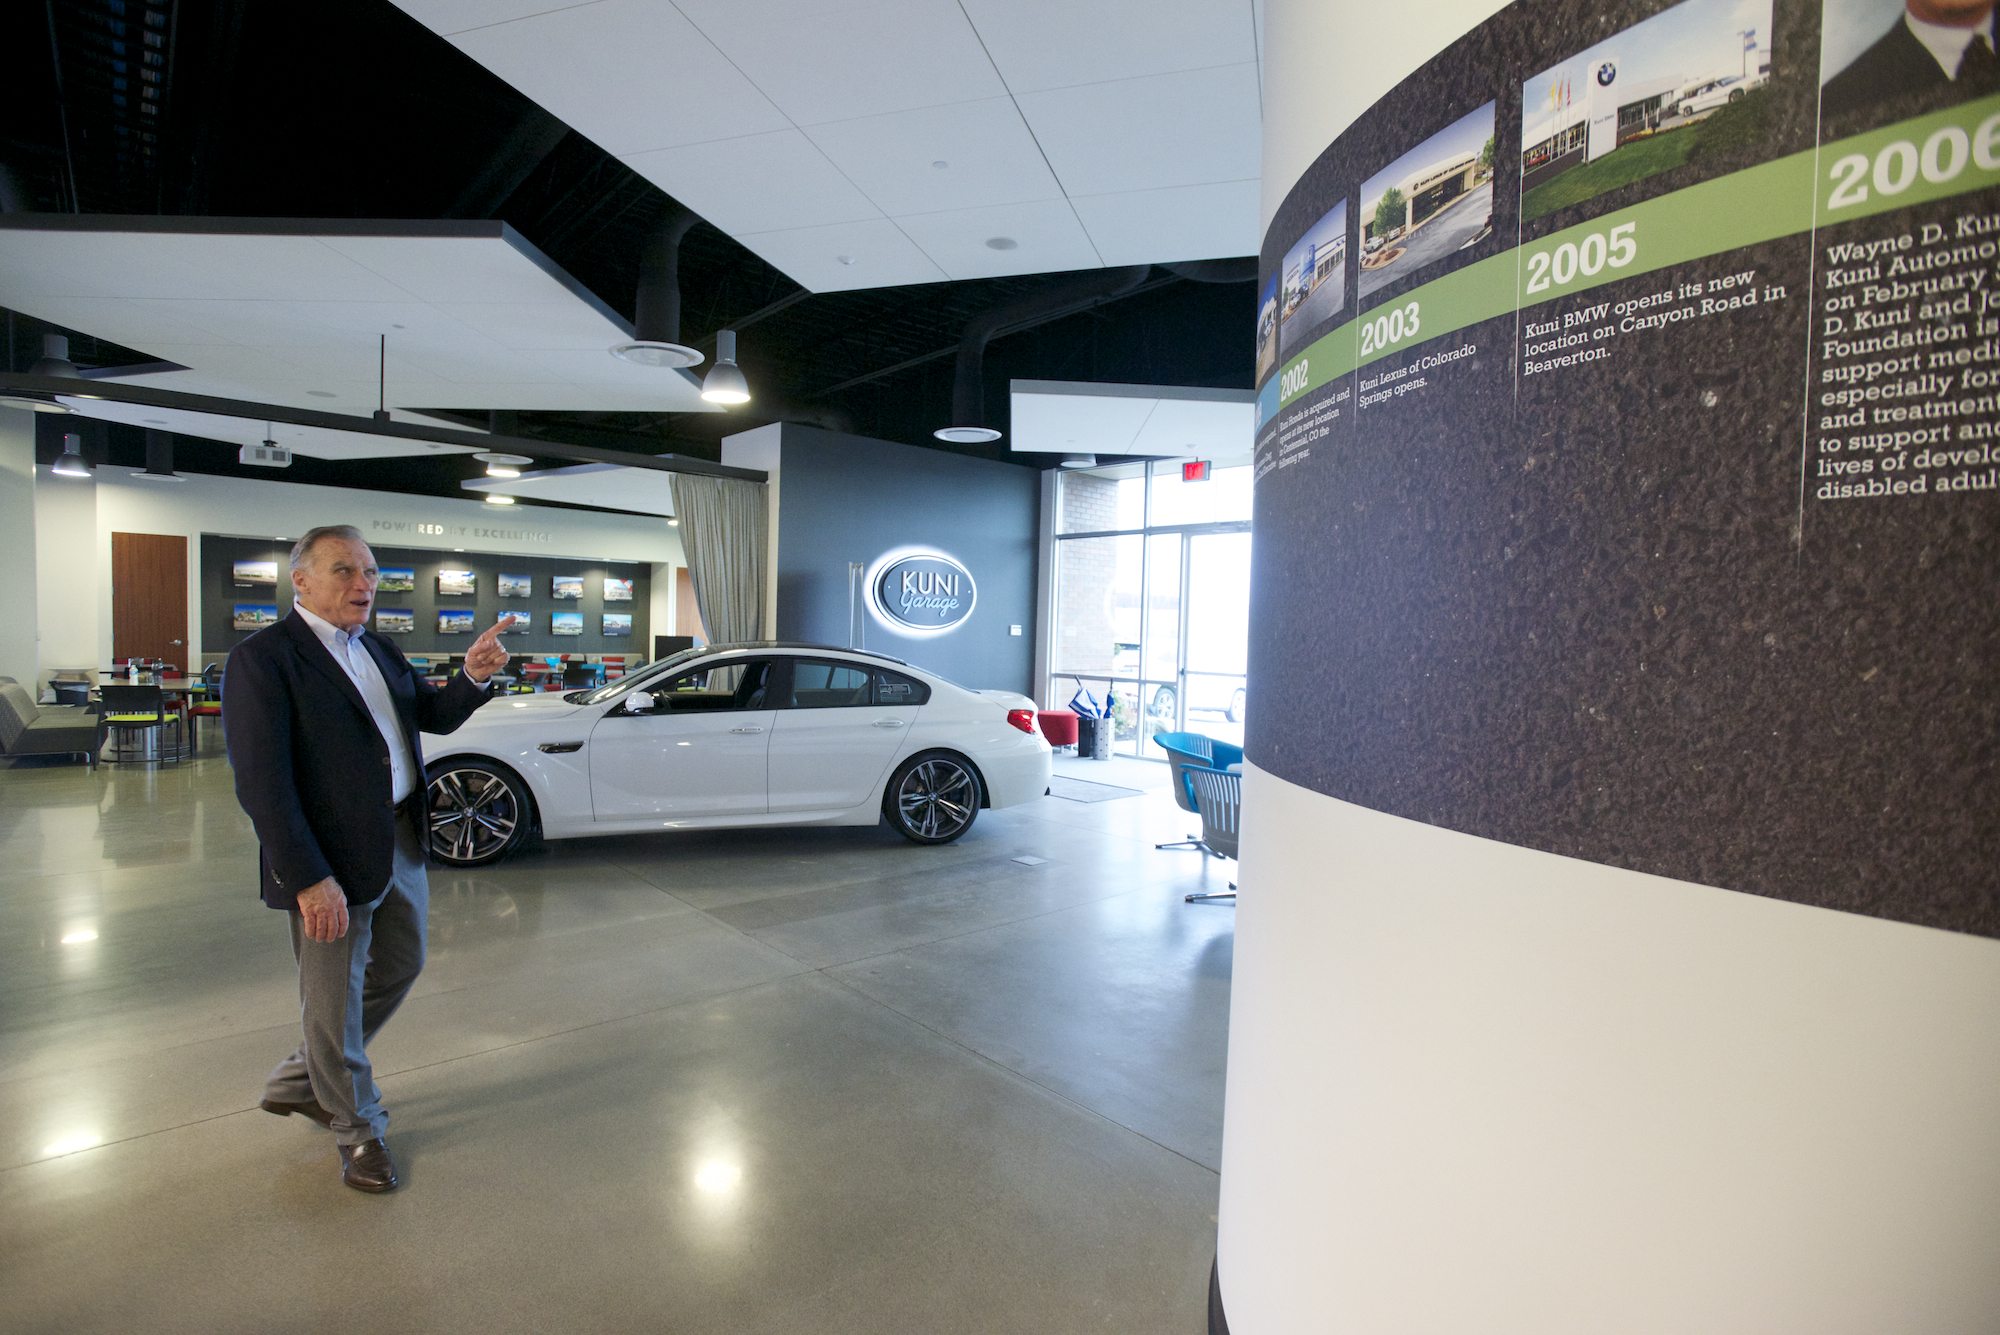 Kuni Auto Group President Greg Goodwin gives a tour of the company headquarters in Vancouver in November.